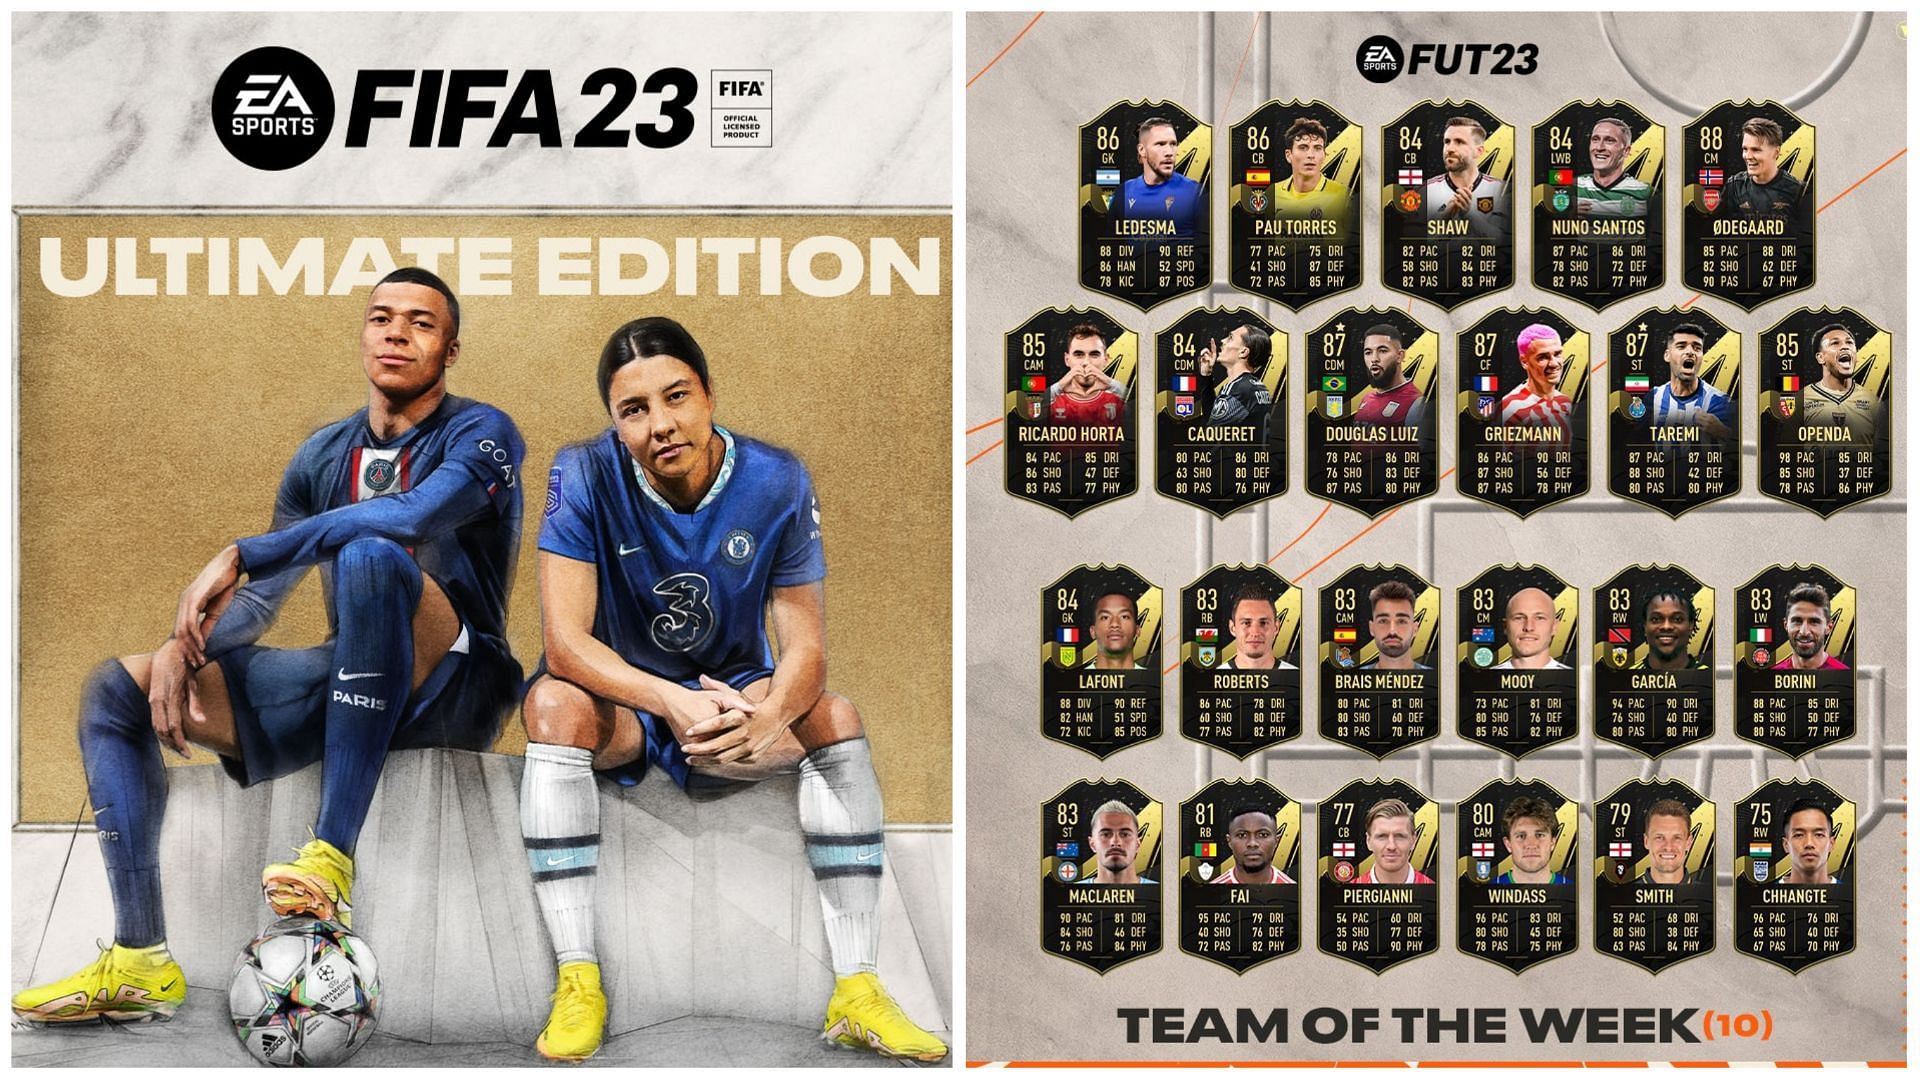 TOTW 10 is live in FIFA 23 (Images via EA Sports)